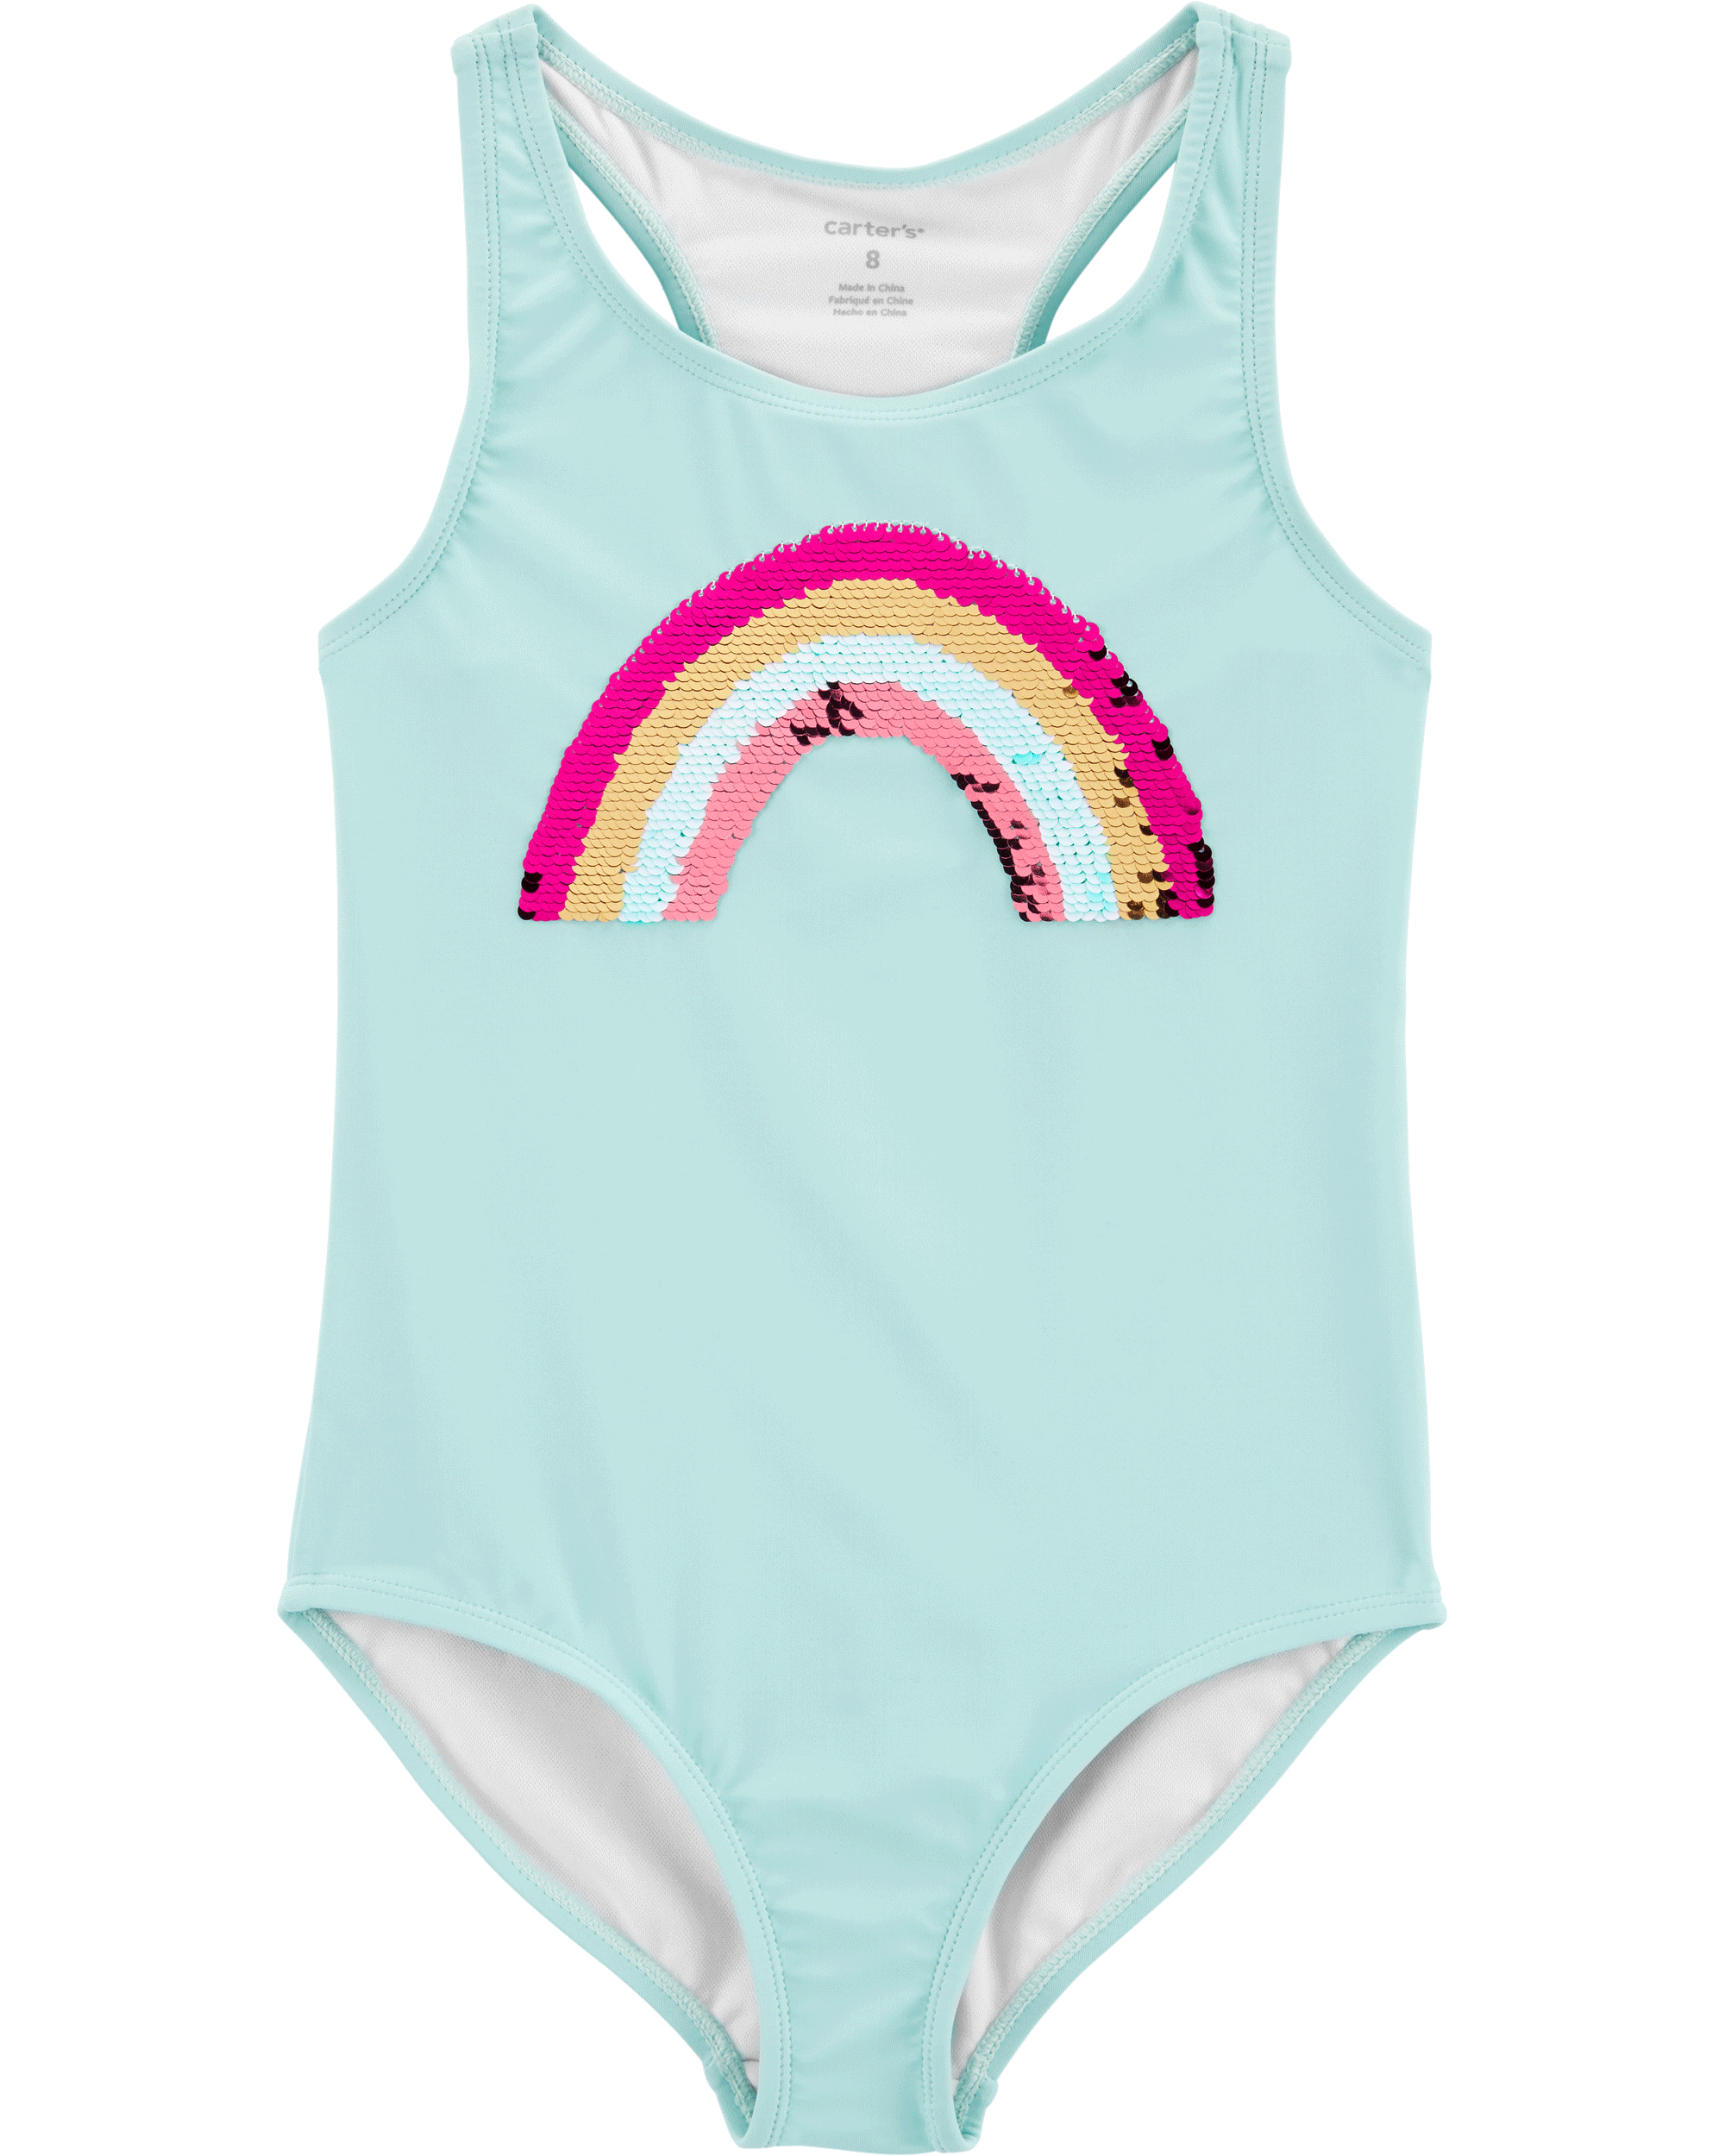 turquoise sparkle one piece swimsuit